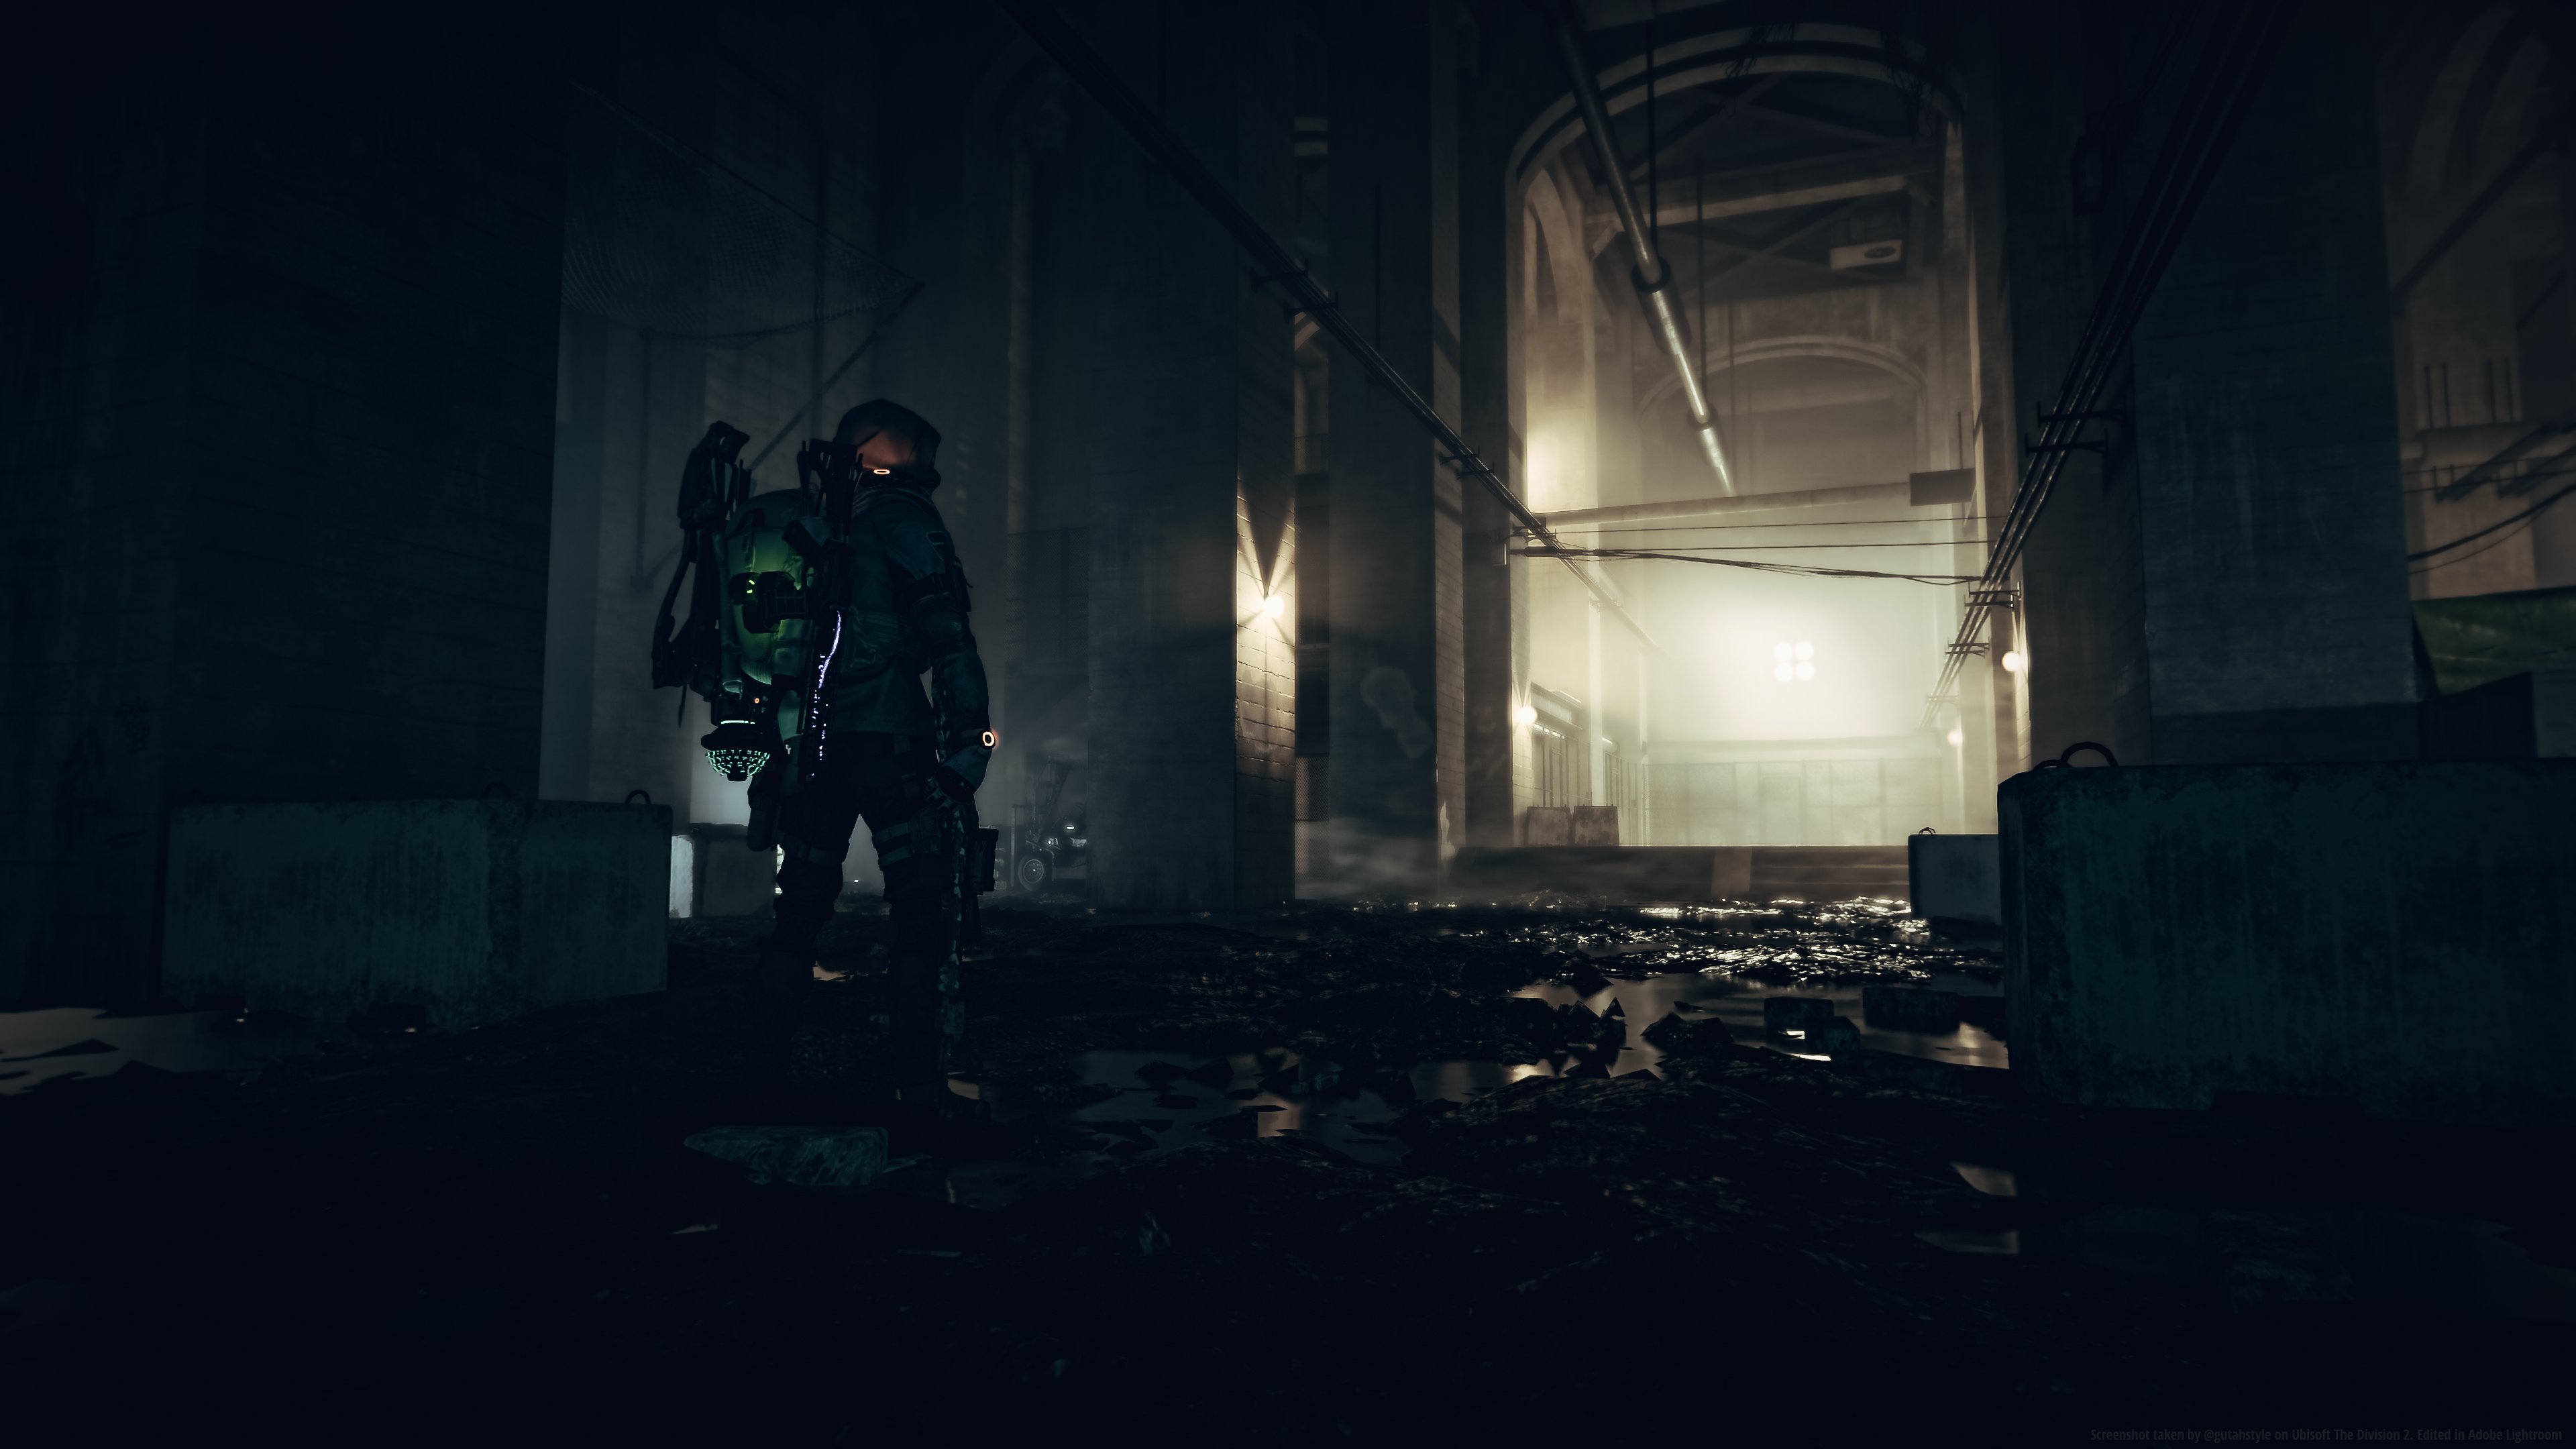 Tom Clancys The Division 2 Edit Screen Shot Game CG 3840x2160